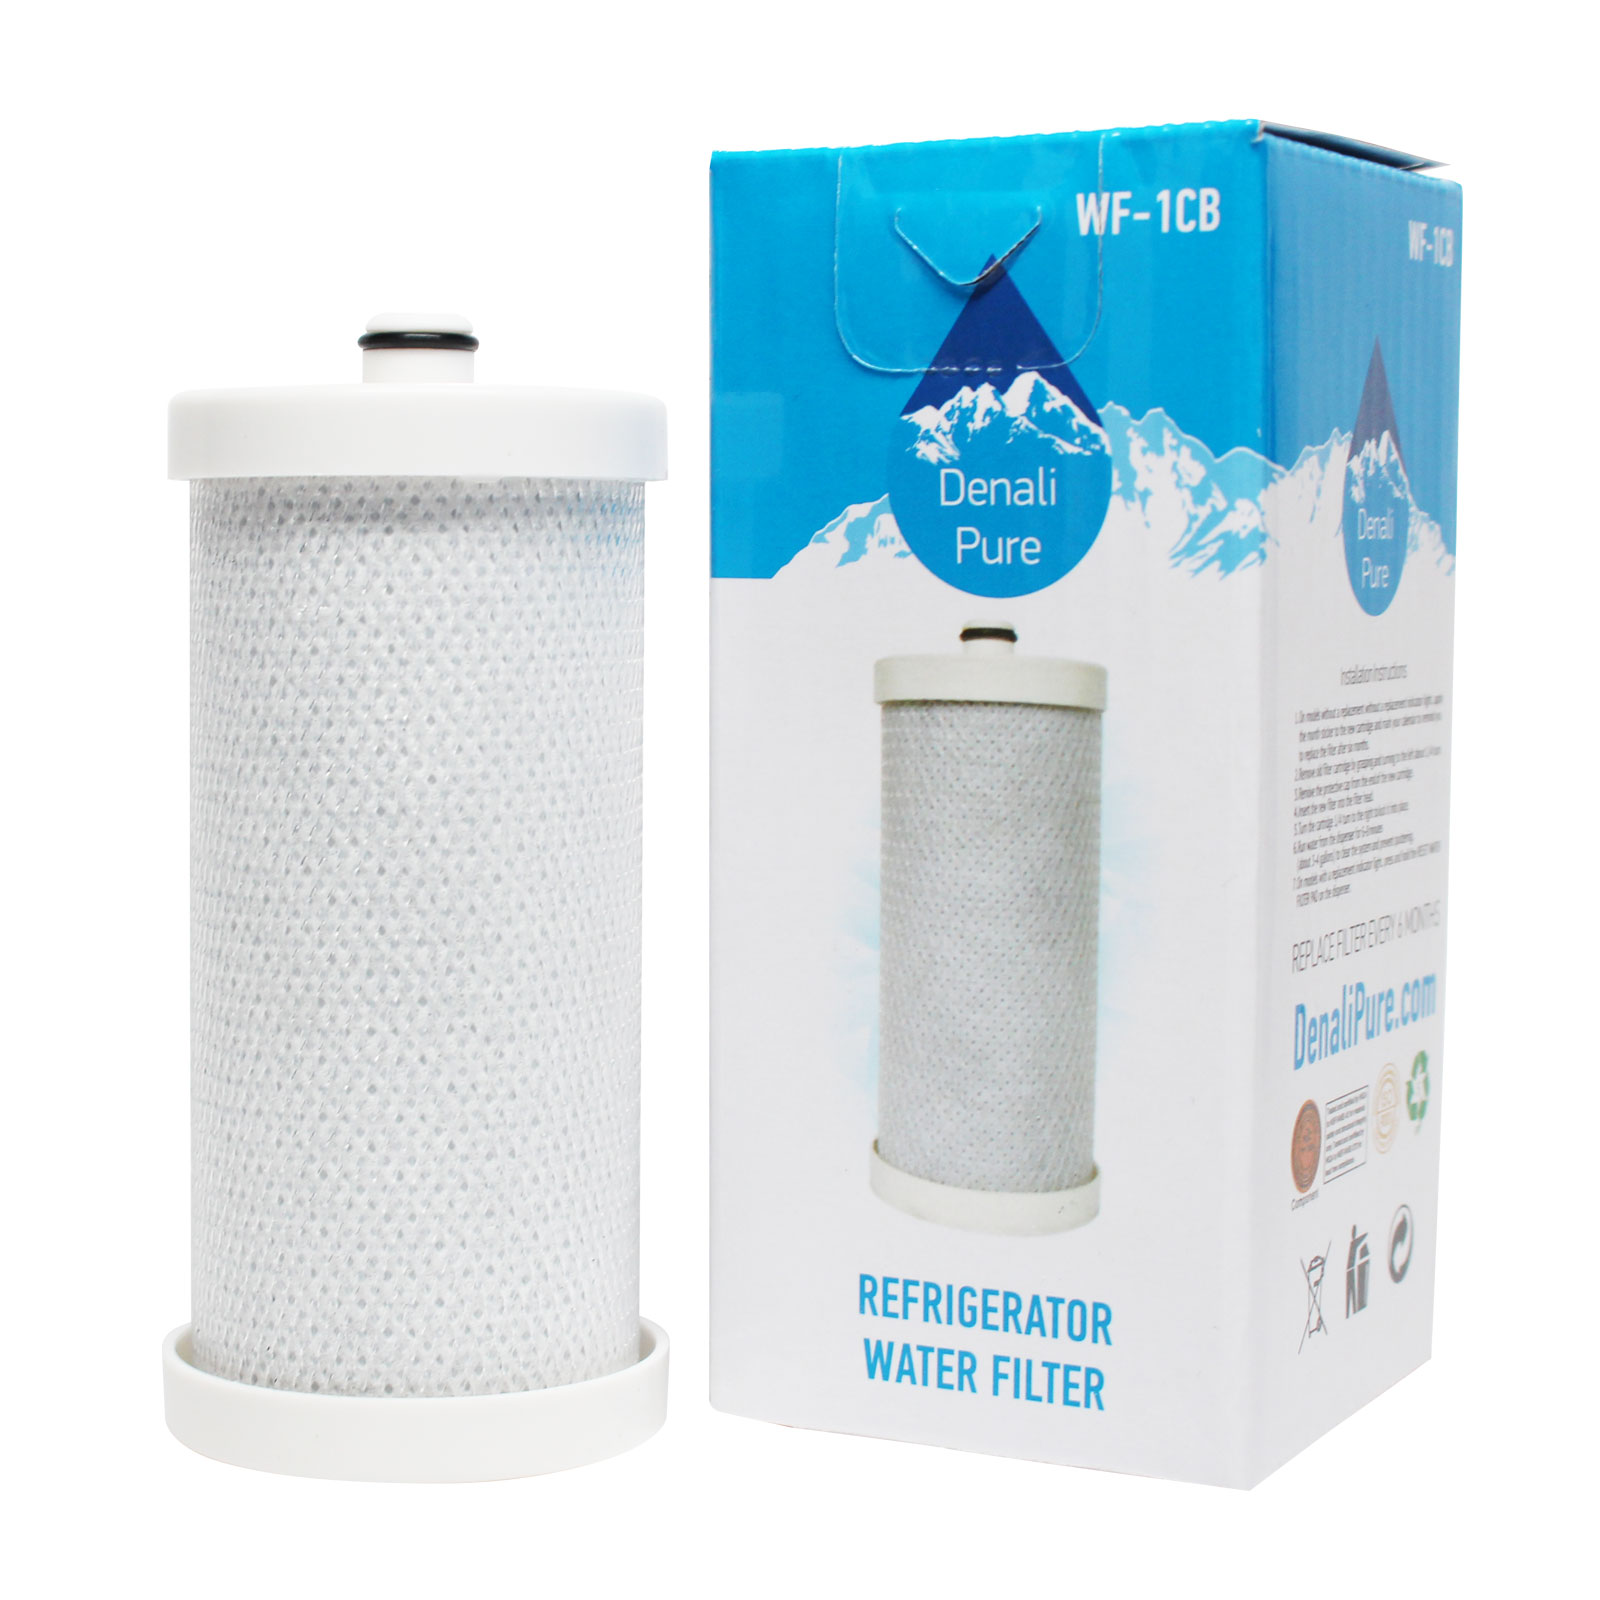 Replacement Frigidaire FRS26R4CB1 Refrigerator Water Filter - Compatible Frigidaire WF1CB, WFCB Fridge Water Filter Cartridge - image 1 of 4